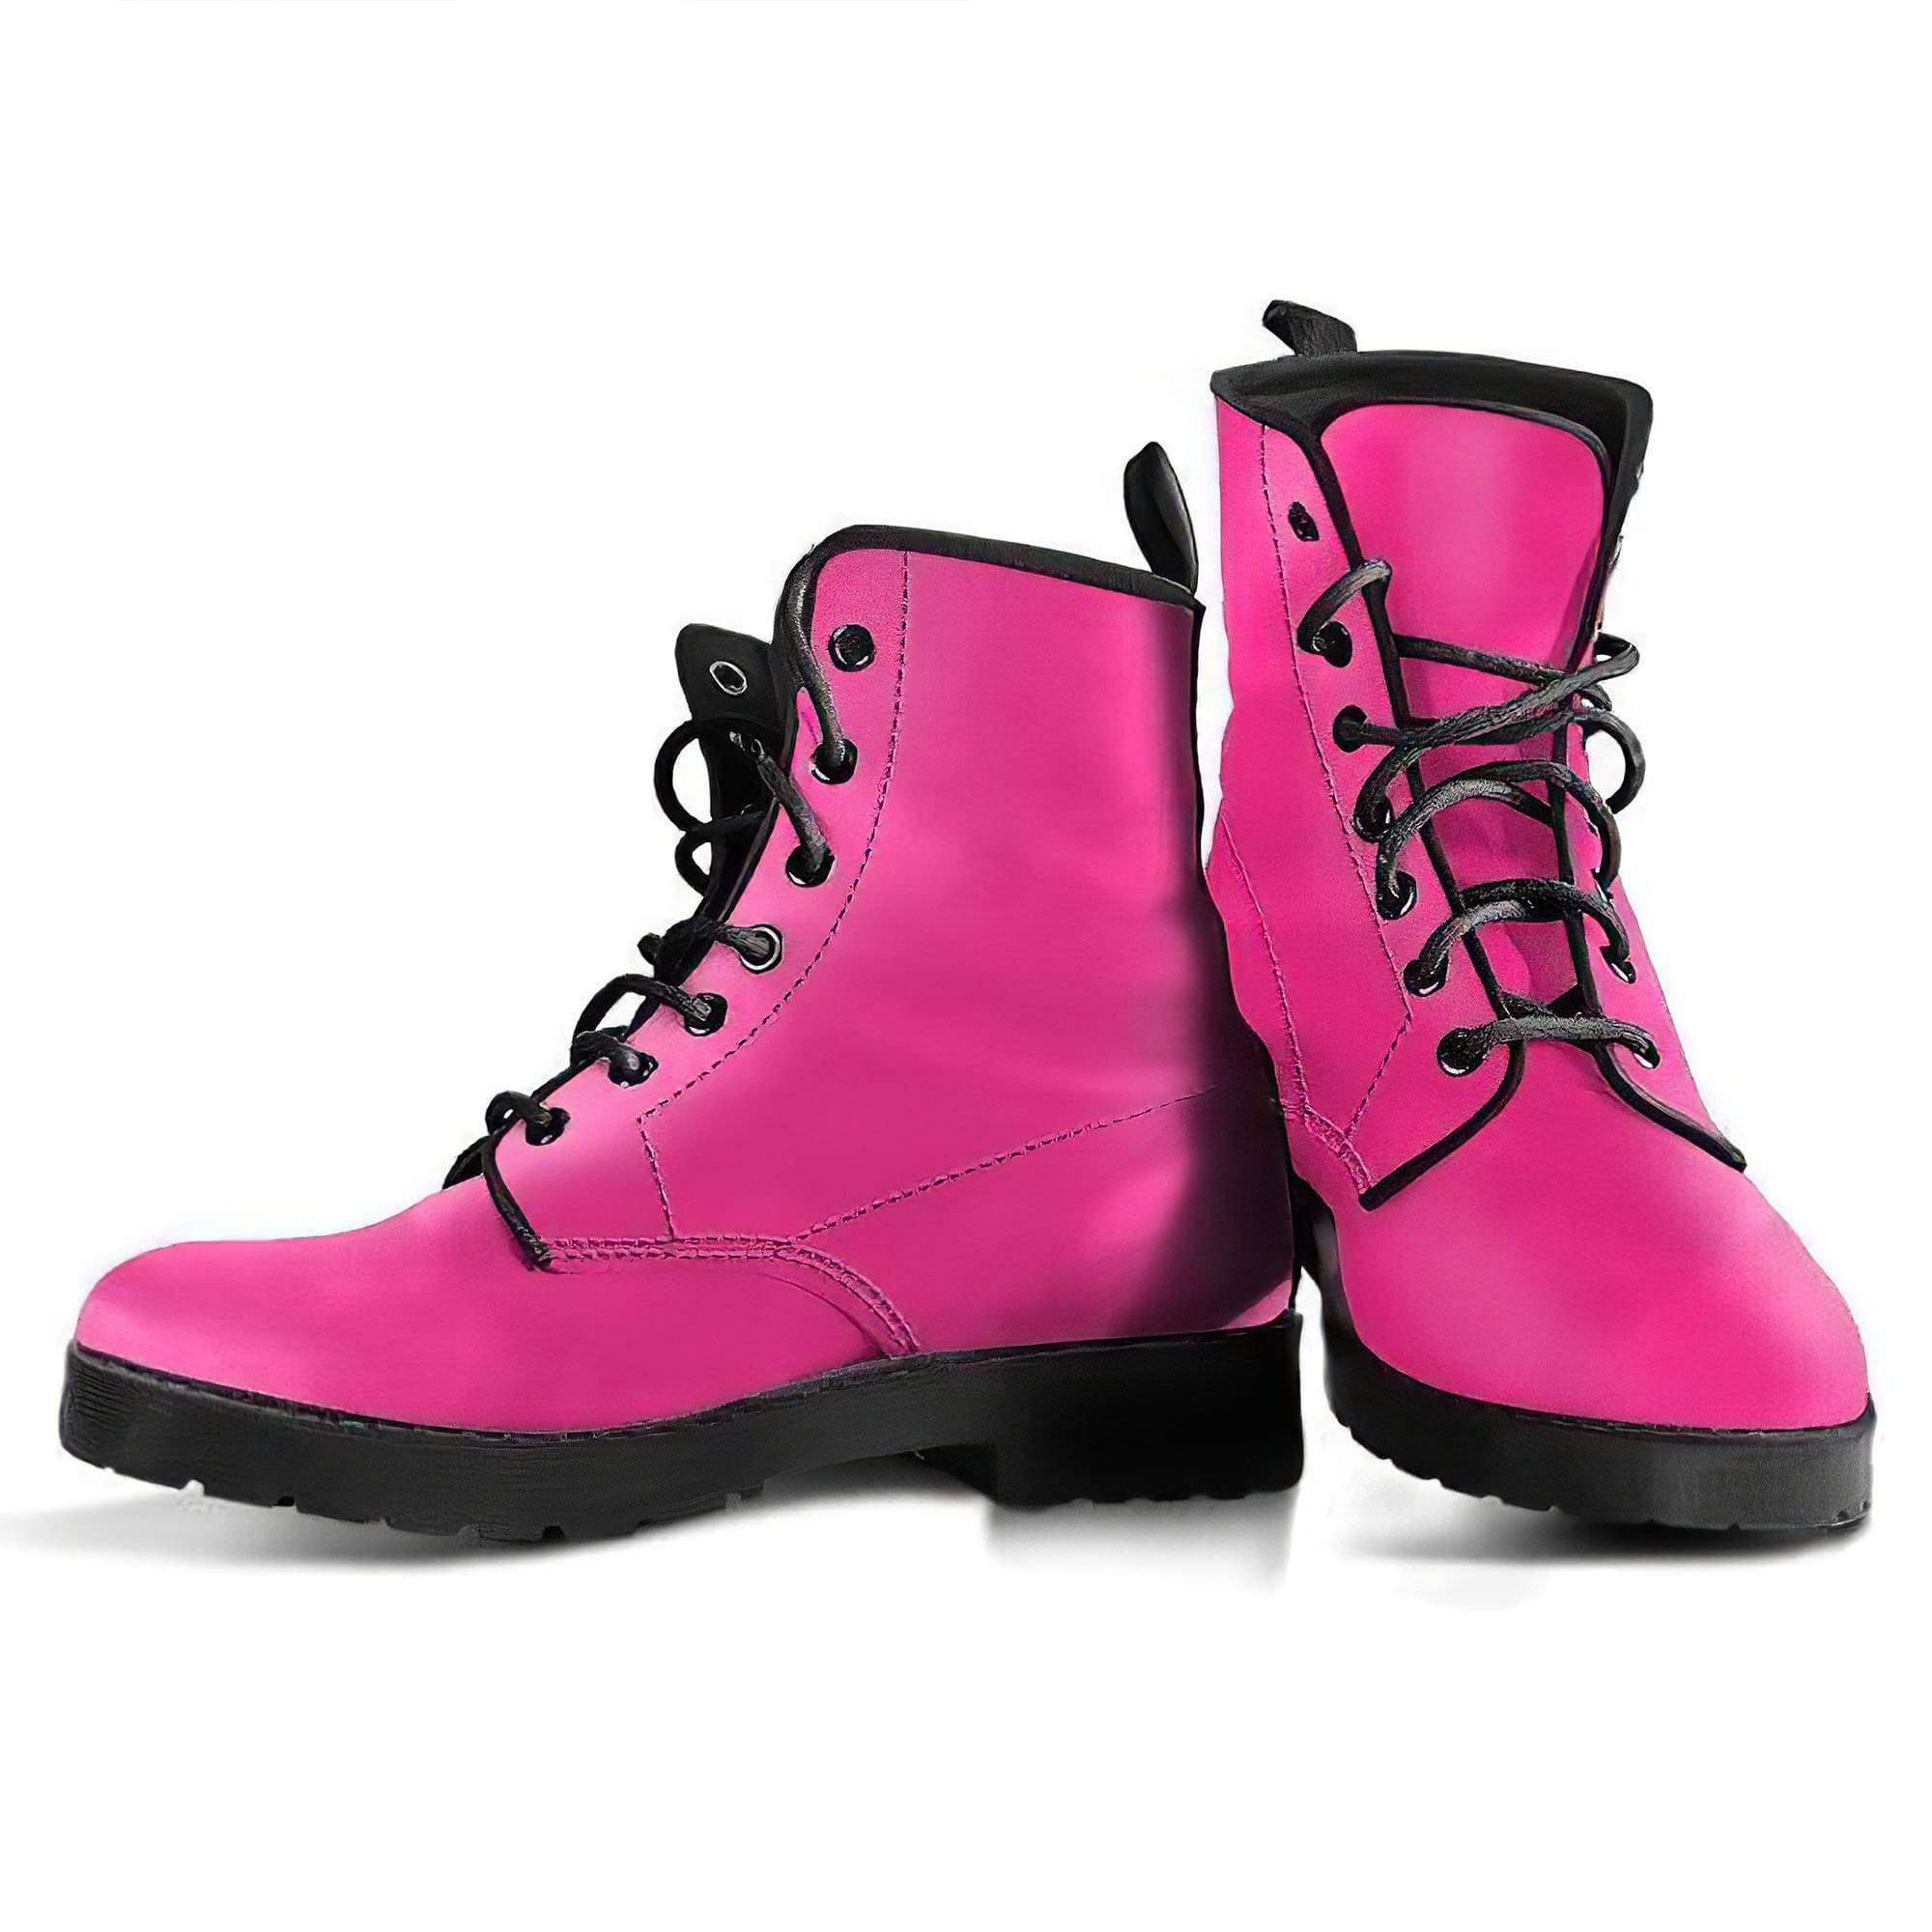 pink-women-s-boots-vegan-friendly-leather-women-s-leather-boots-12051931824189.jpg